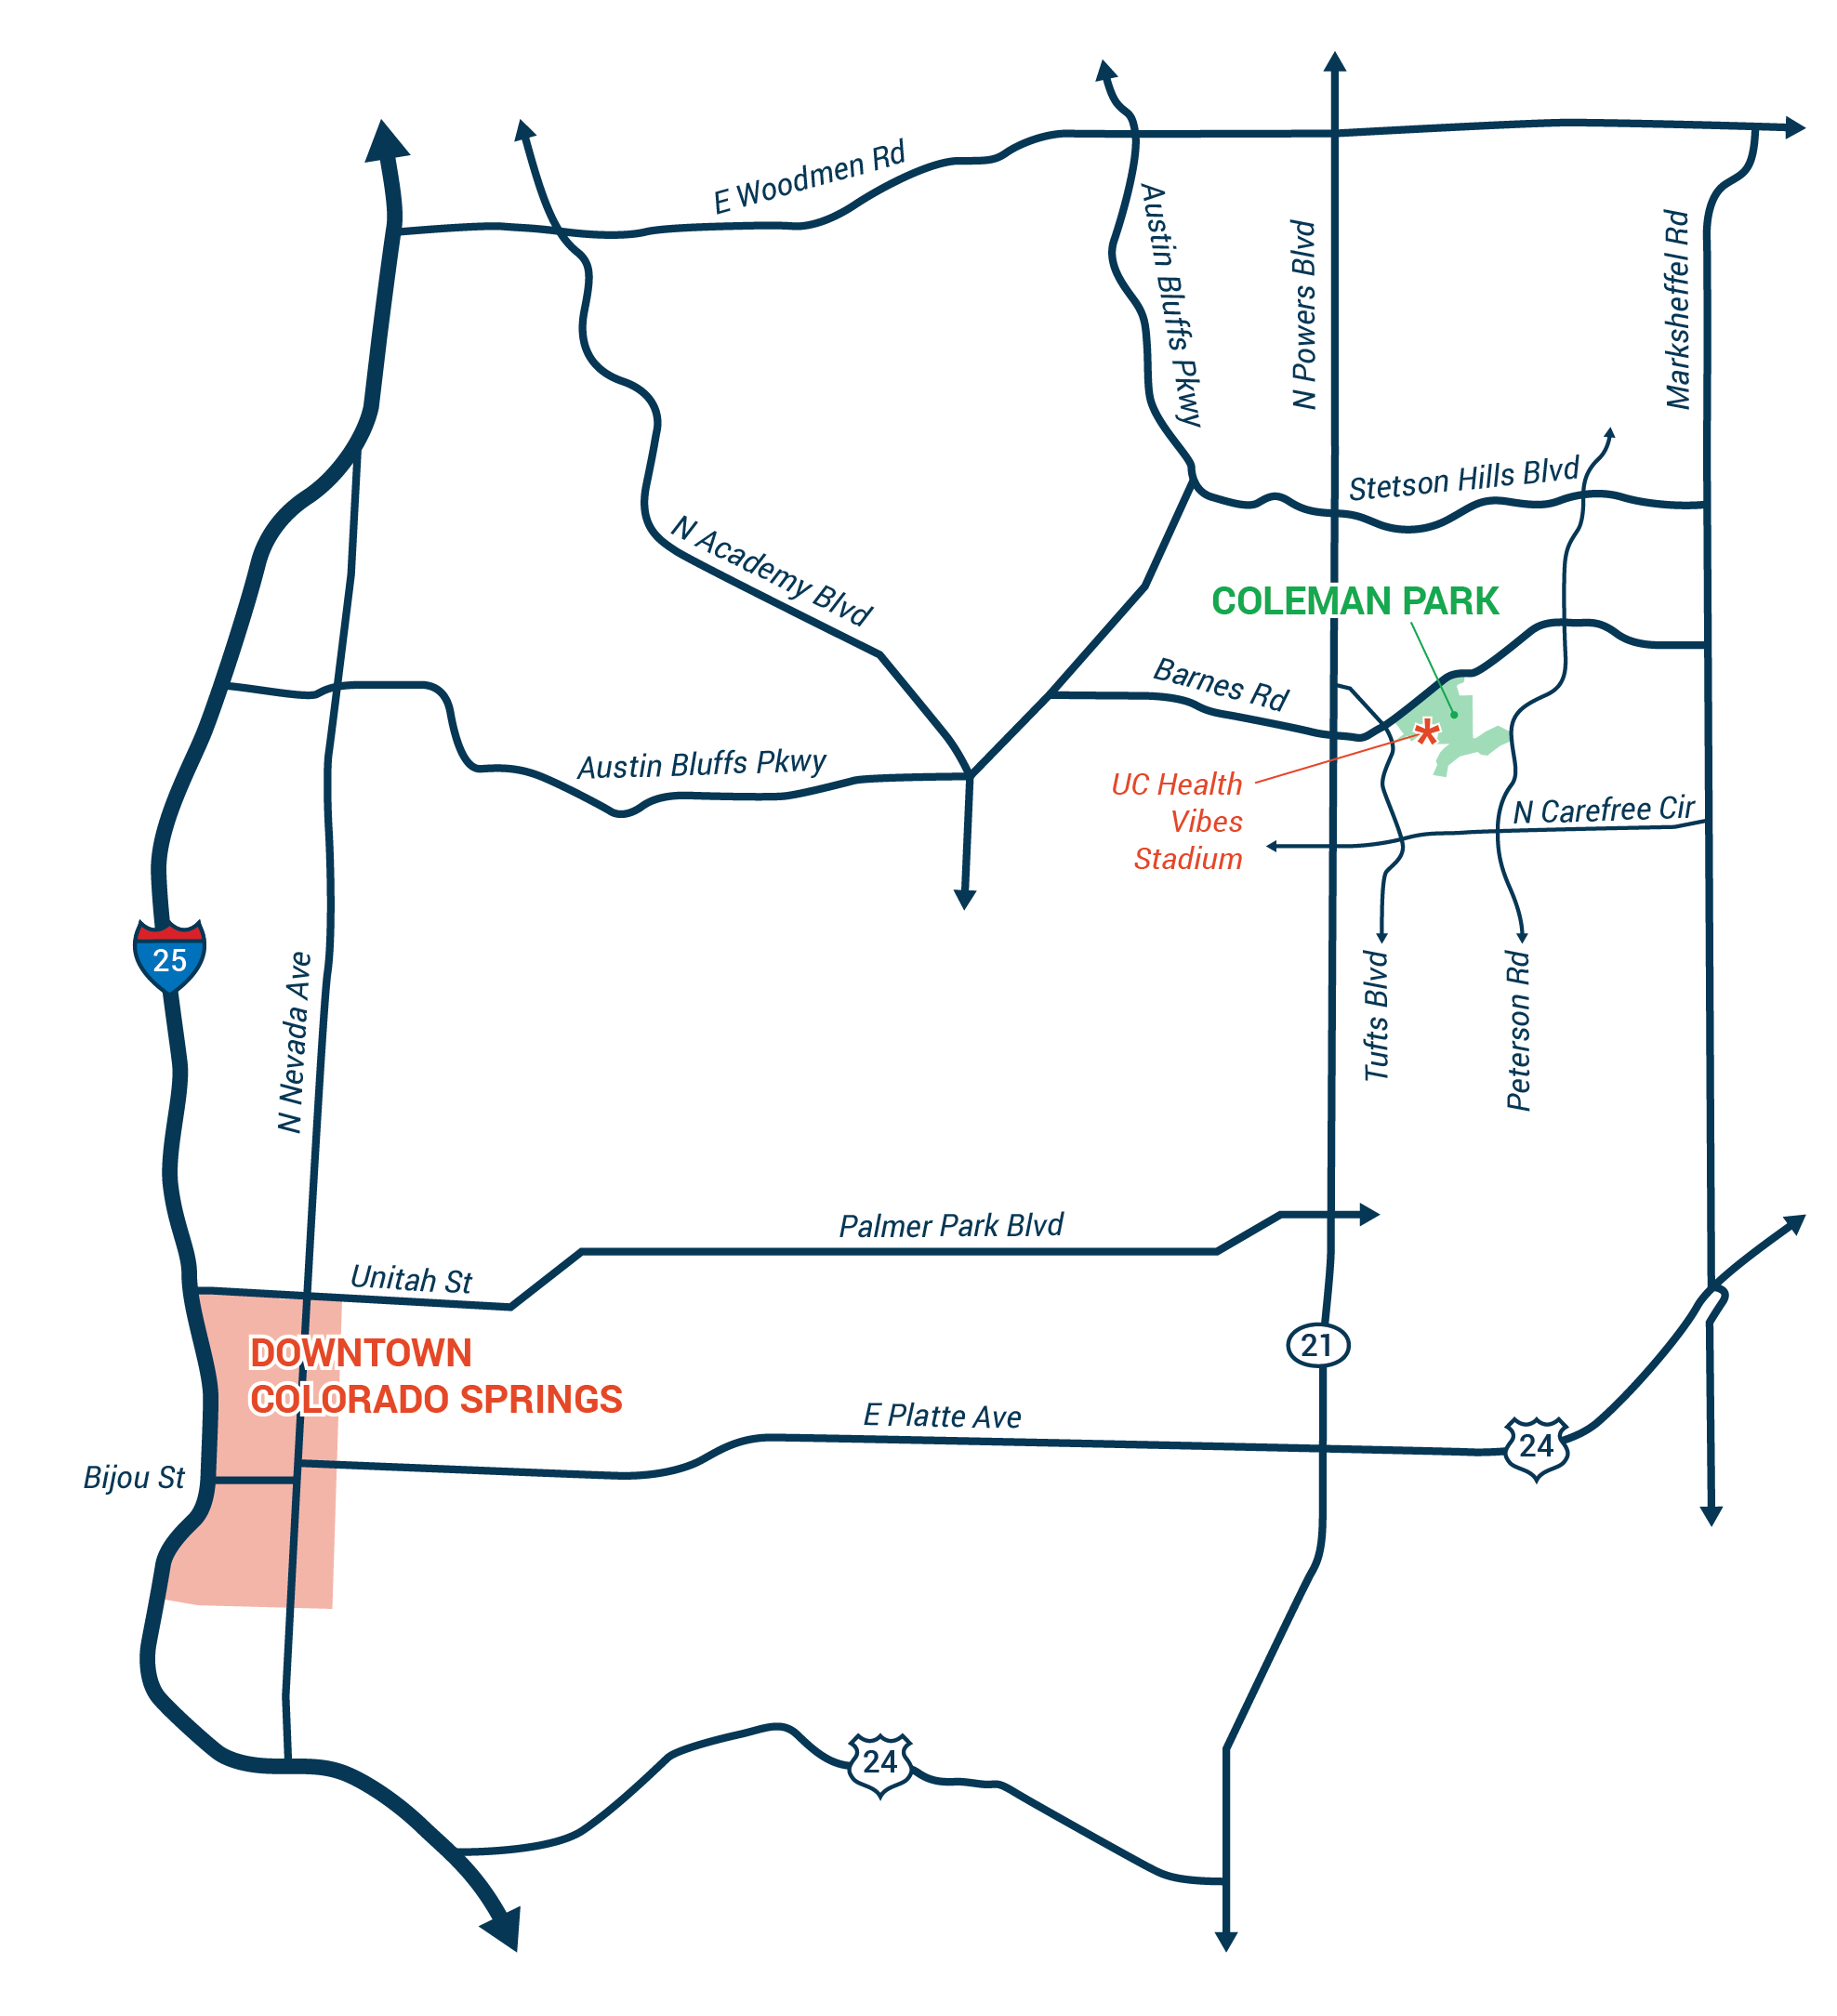 map of Colorado Springs showing Coleman Park east of Powers Blvd